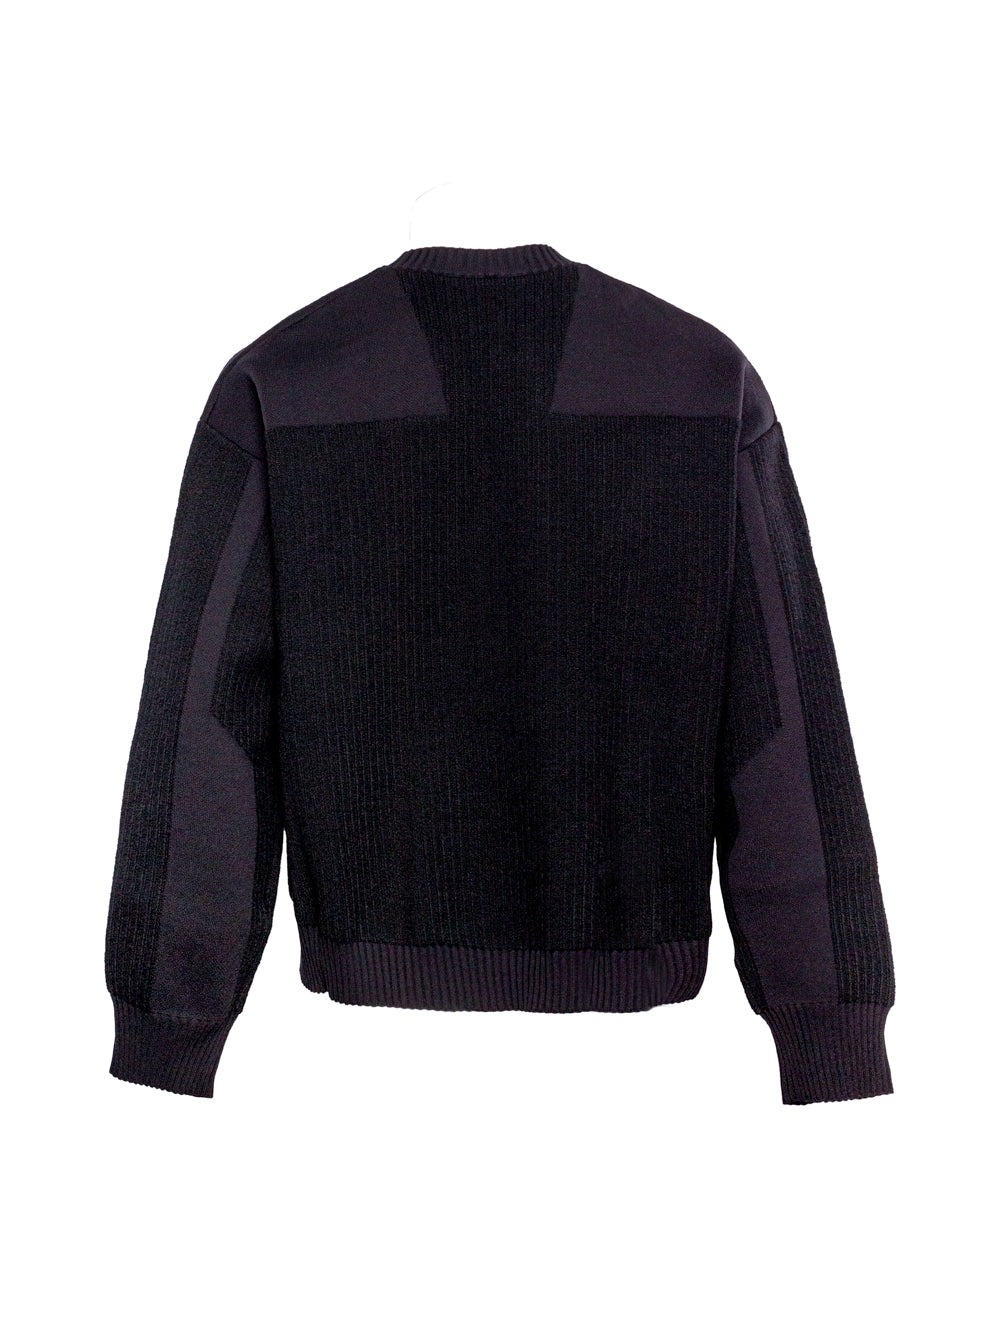 Y-3 RIBBED-KNIT PANELLED JUMPER